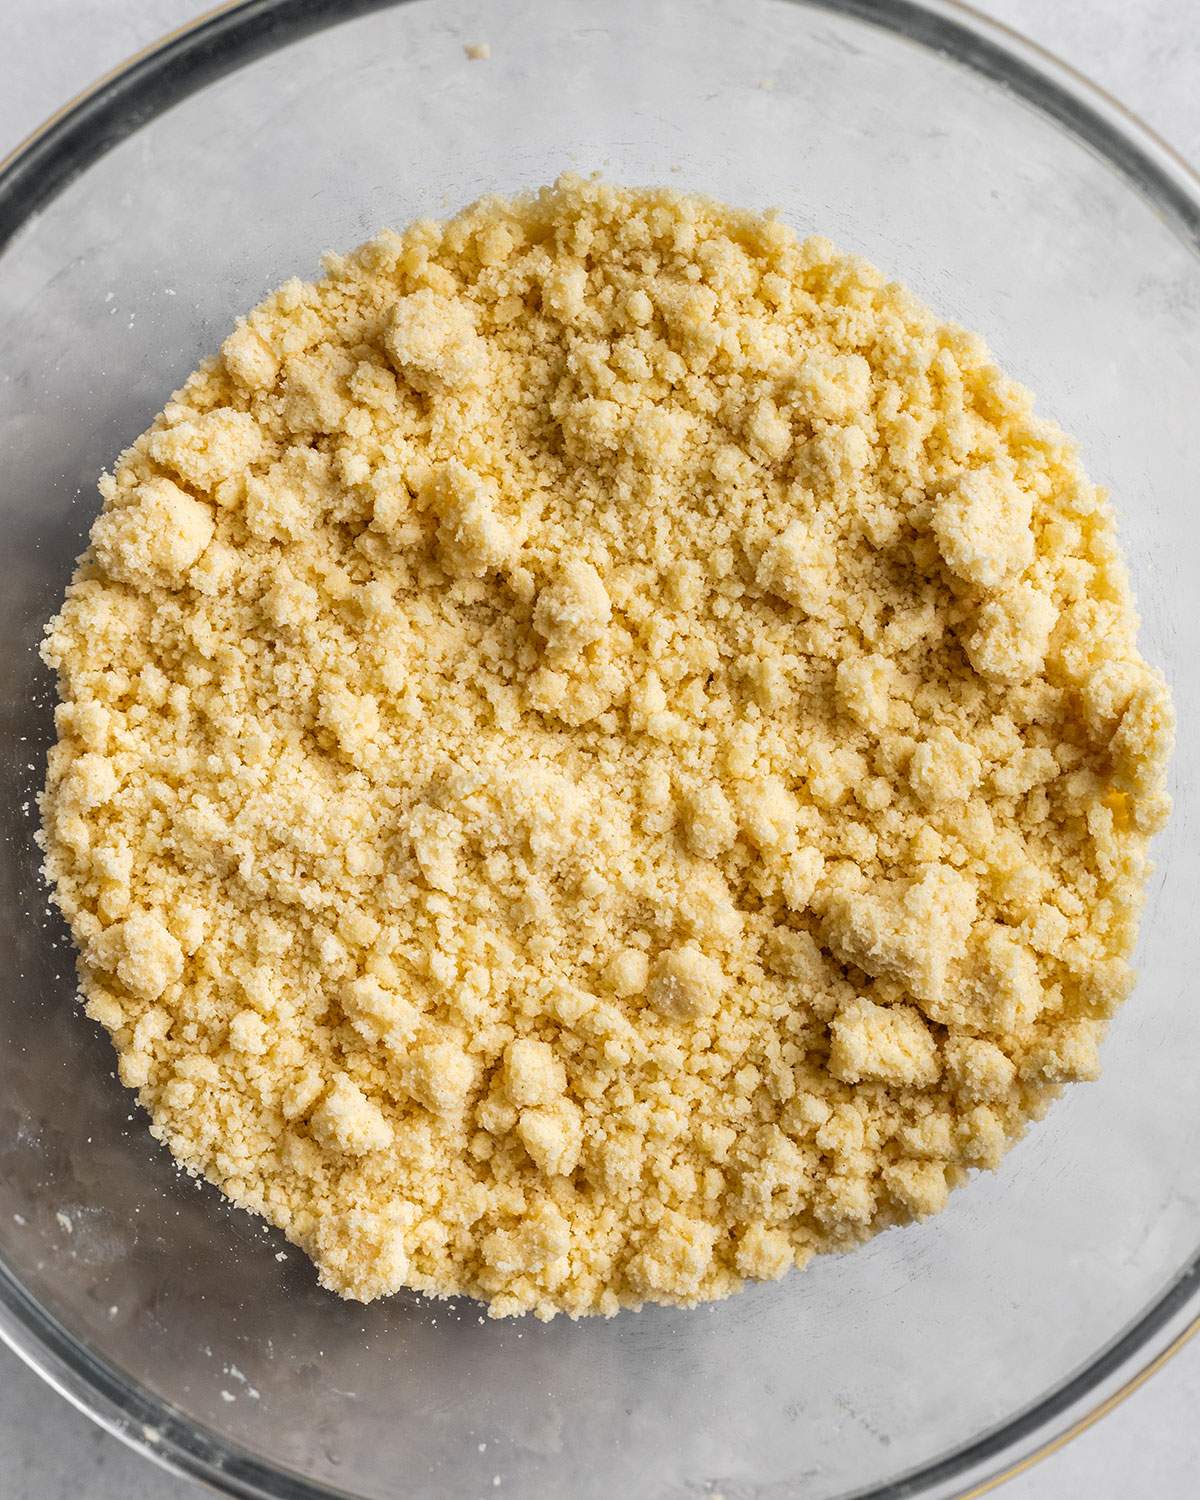 The crumble mix is shown in a glass bowl and its texture is coarse and crumbly.